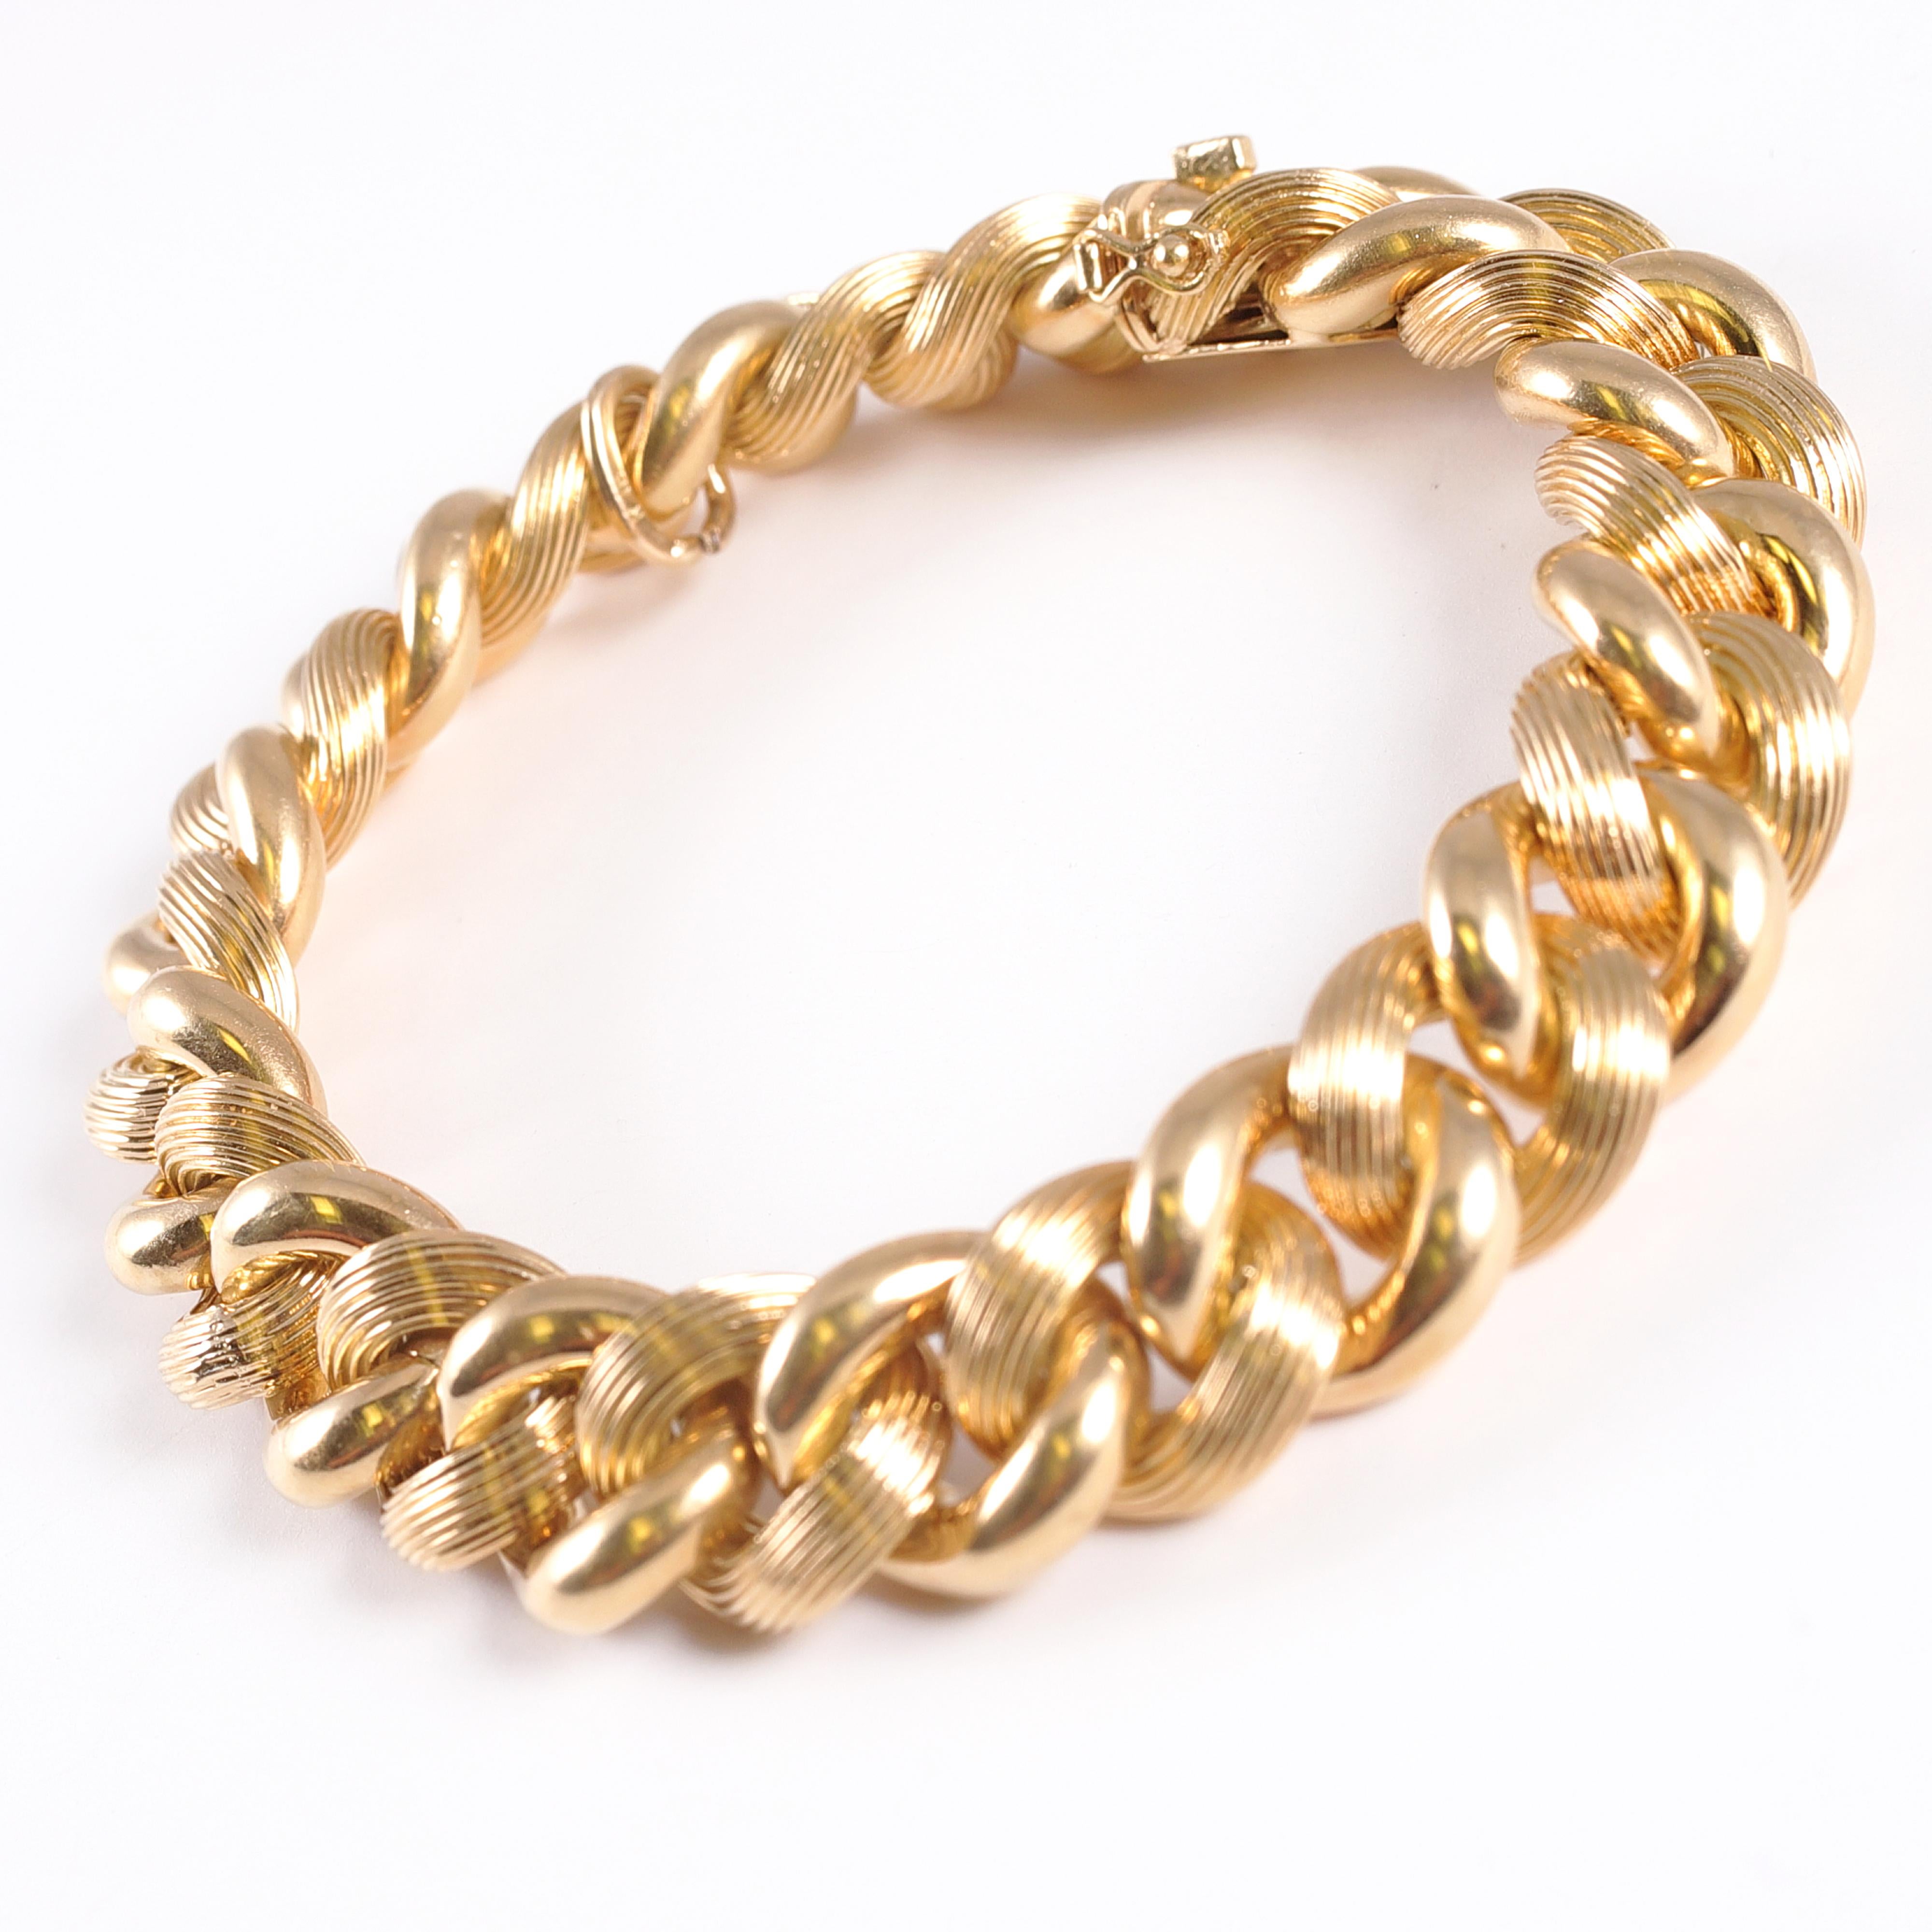 18 karat yellow gold textured link bracelet by Tiffany & Co.  This bracelet is 7 1/4 inches.